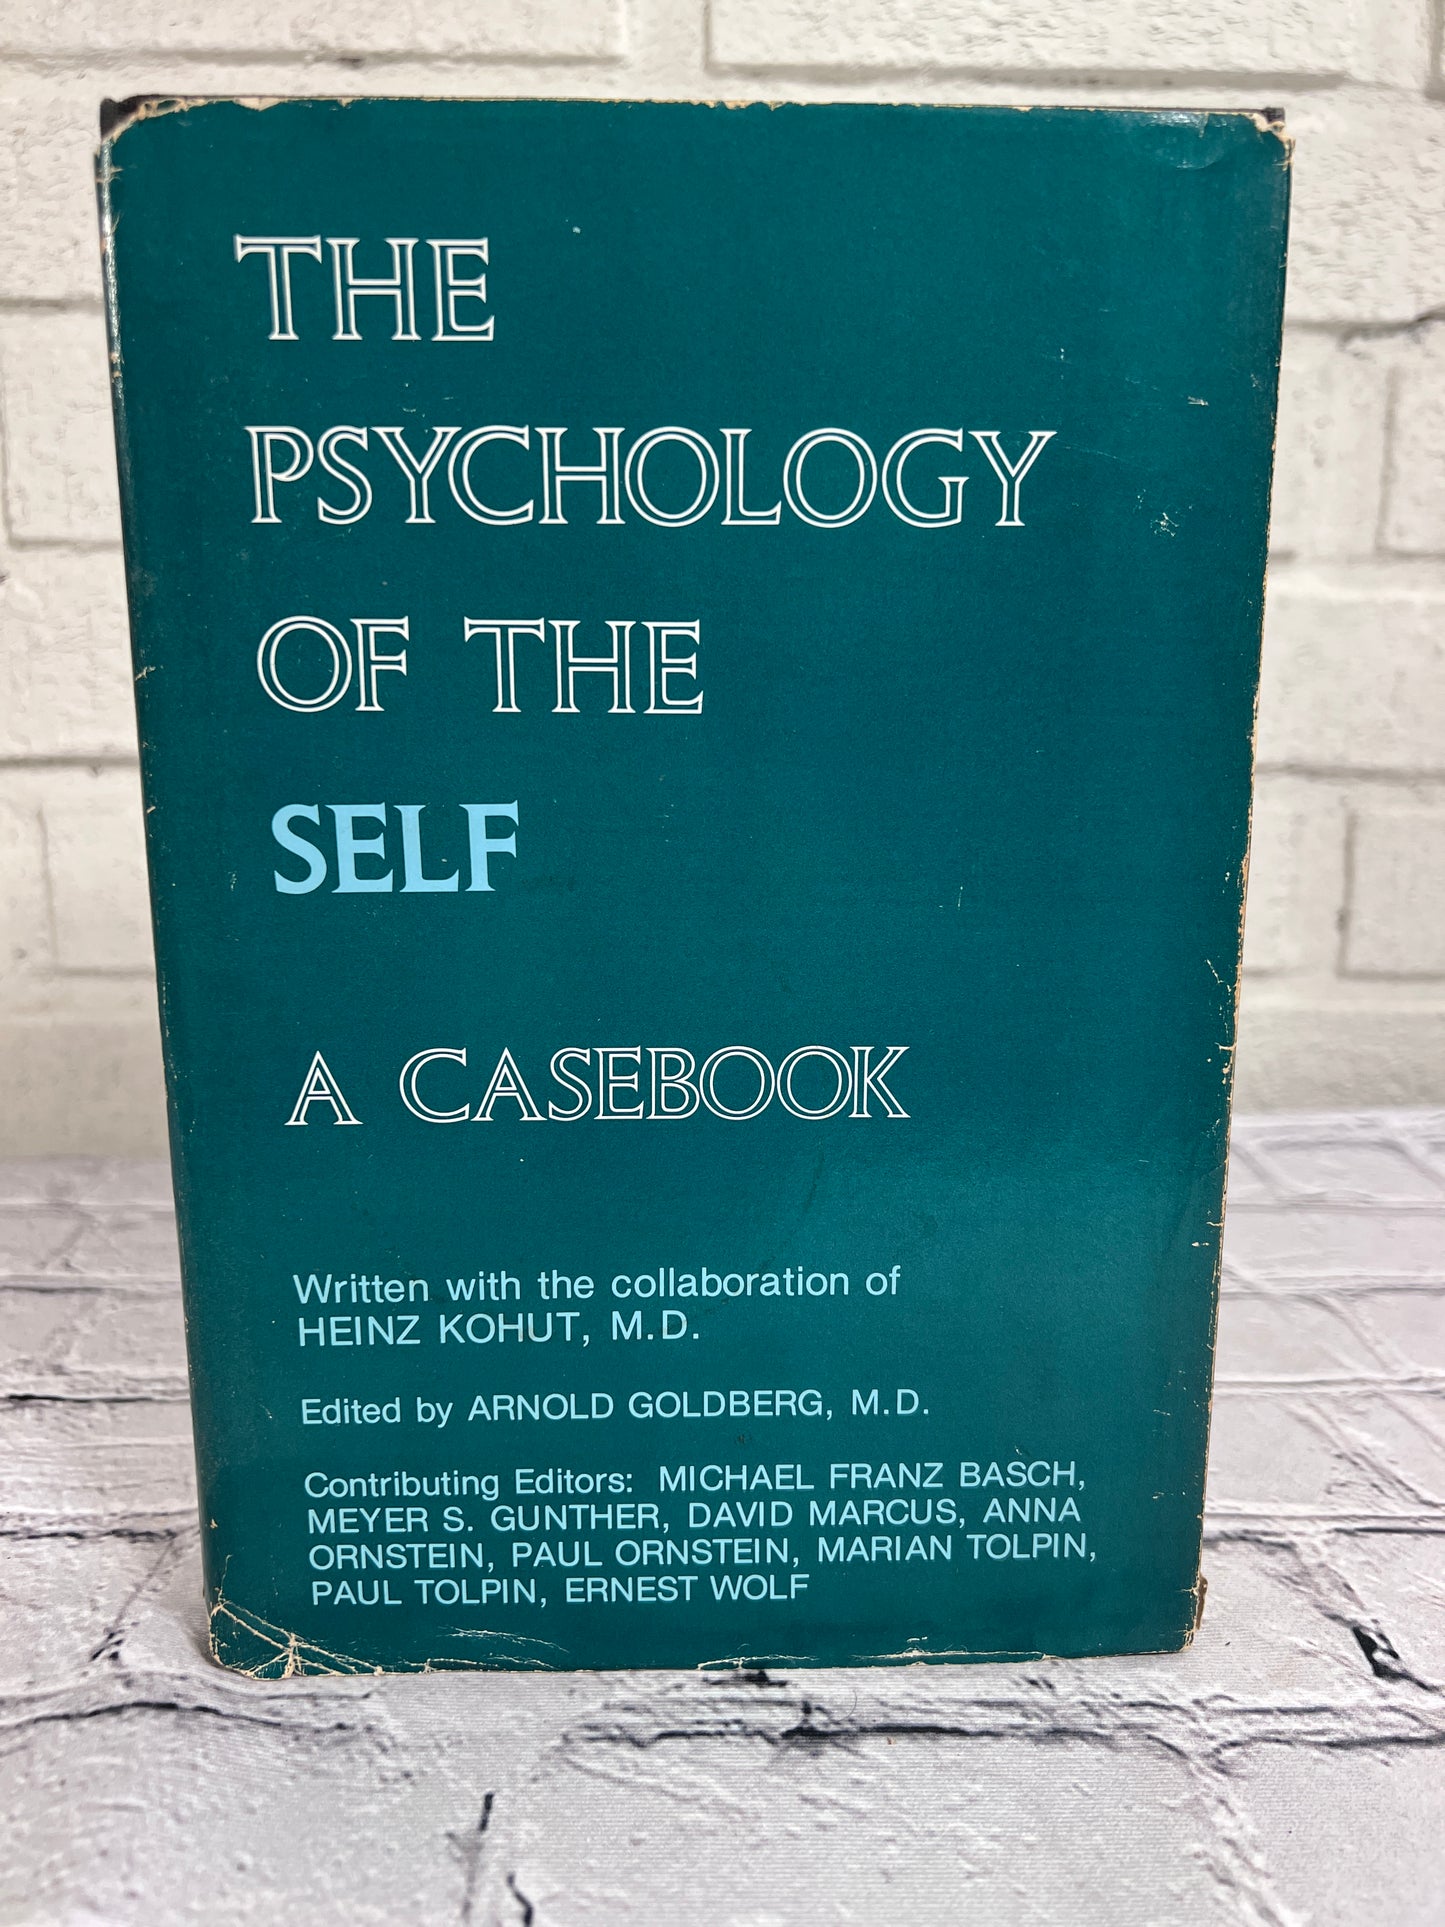 The Psychology of the Self, A Casebook by Heinz Kohut [1979 · 2nd Printing]